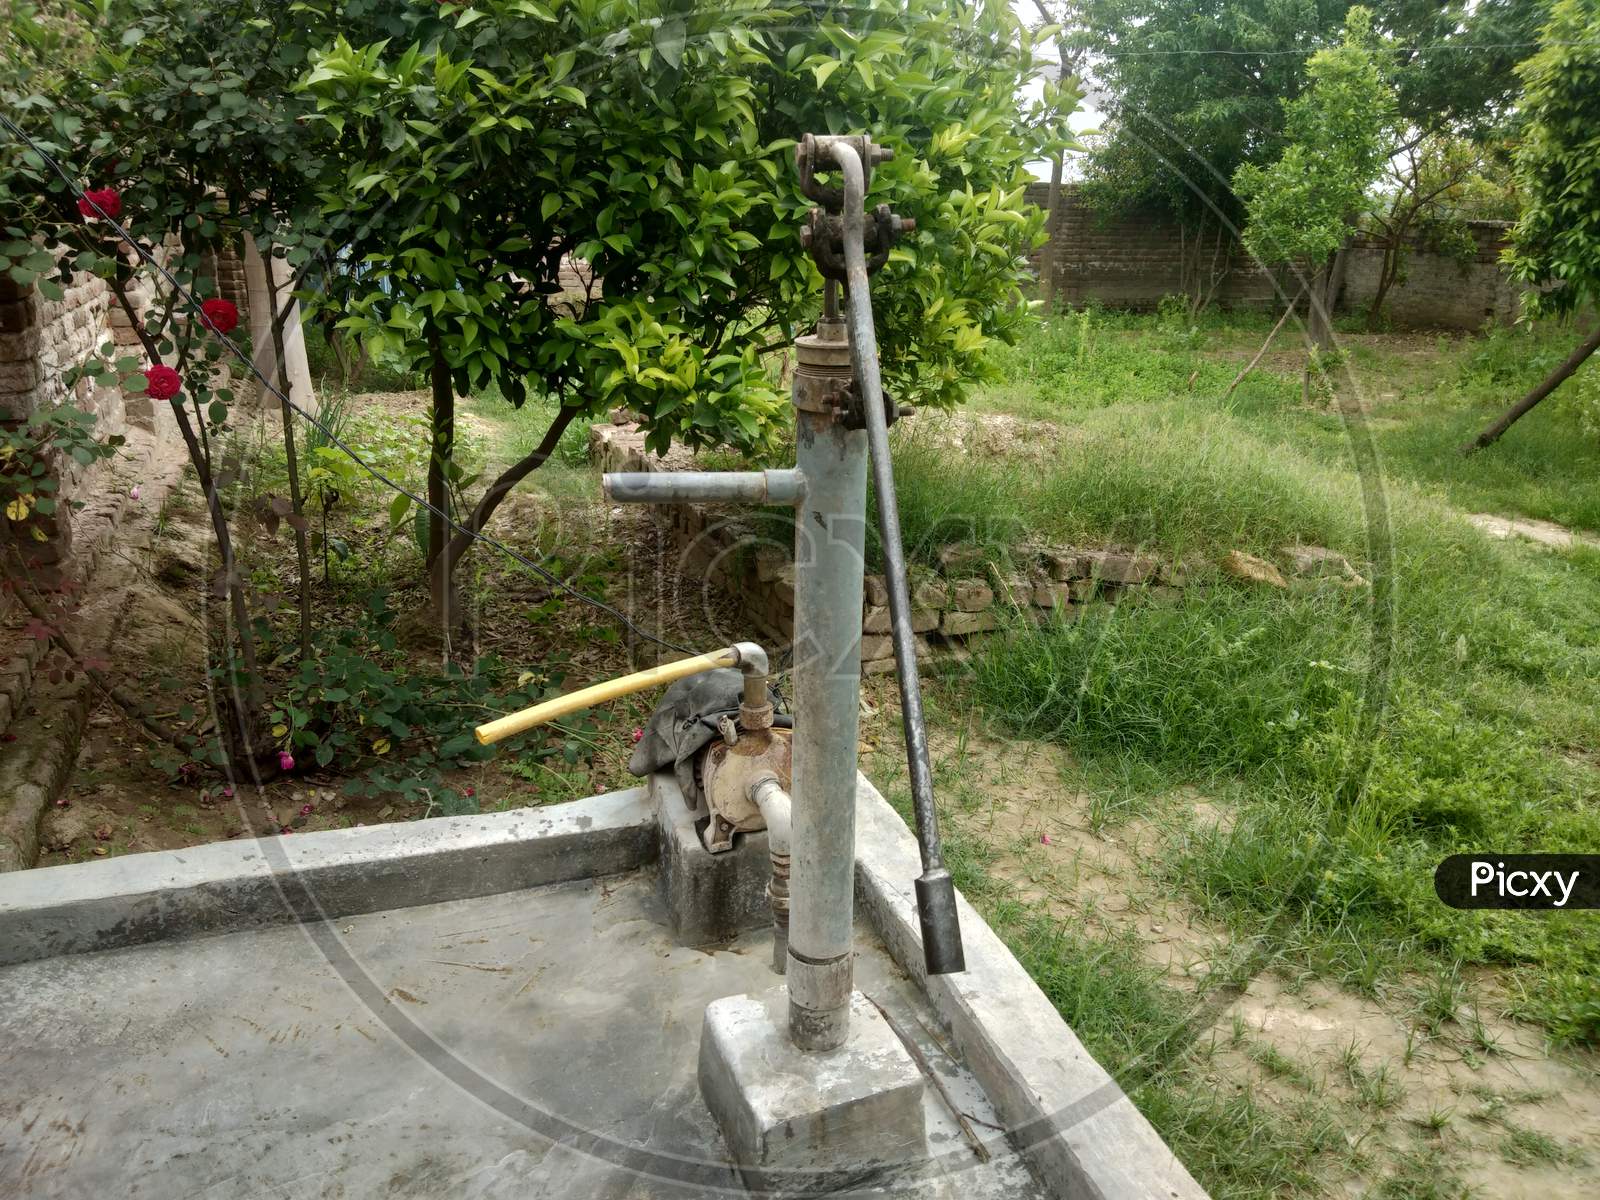 A water tap in village life with green plants in background